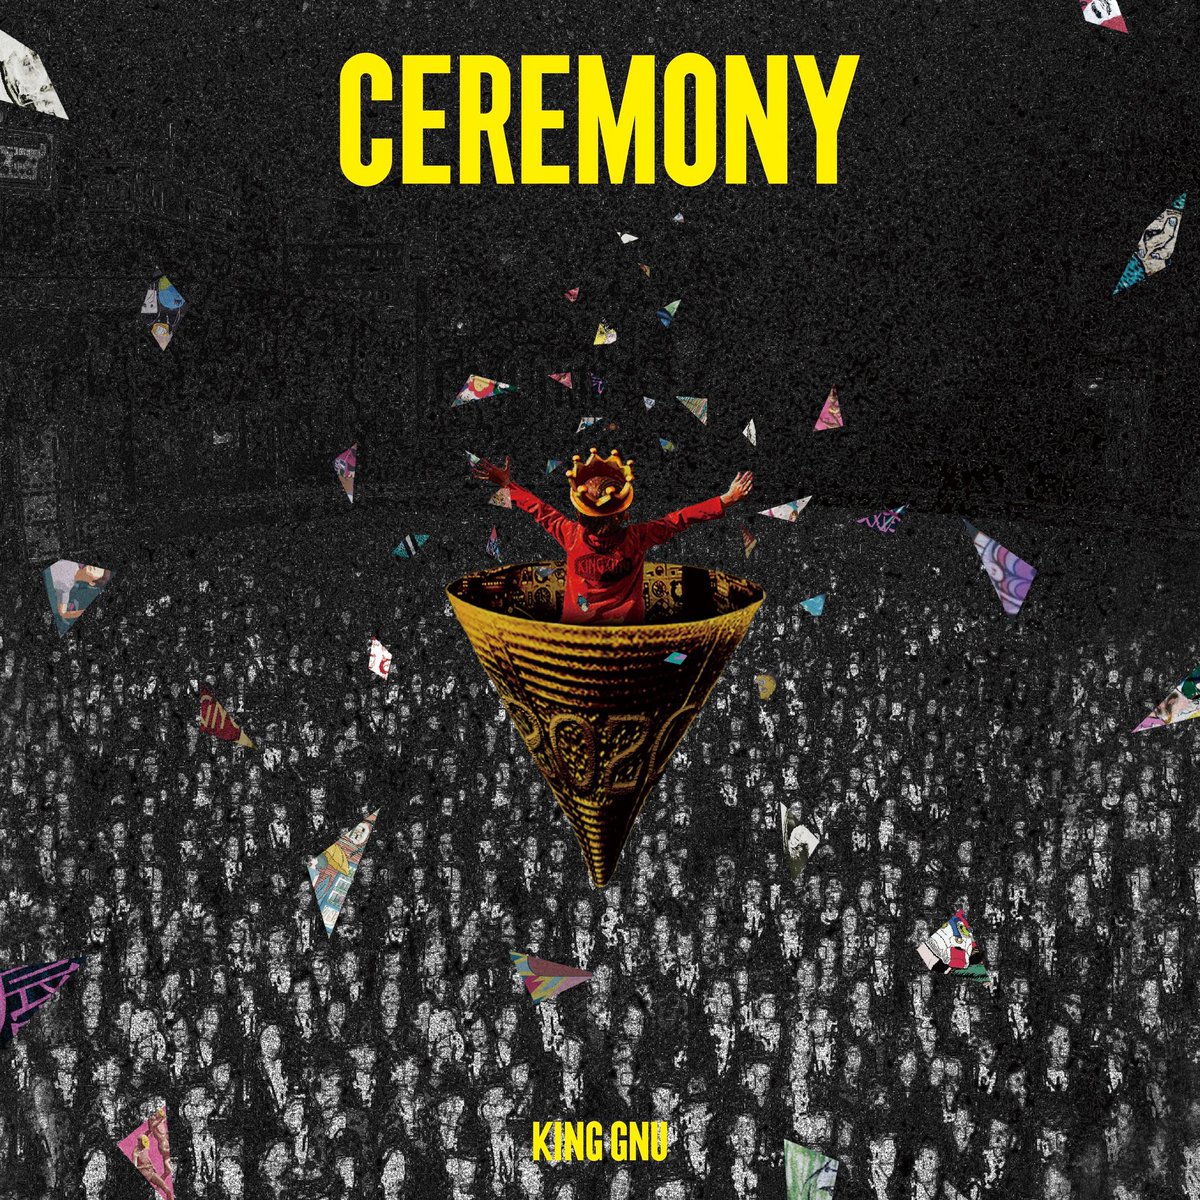 Cover for『King Gnu - Doron』from the release『CEREMONY』